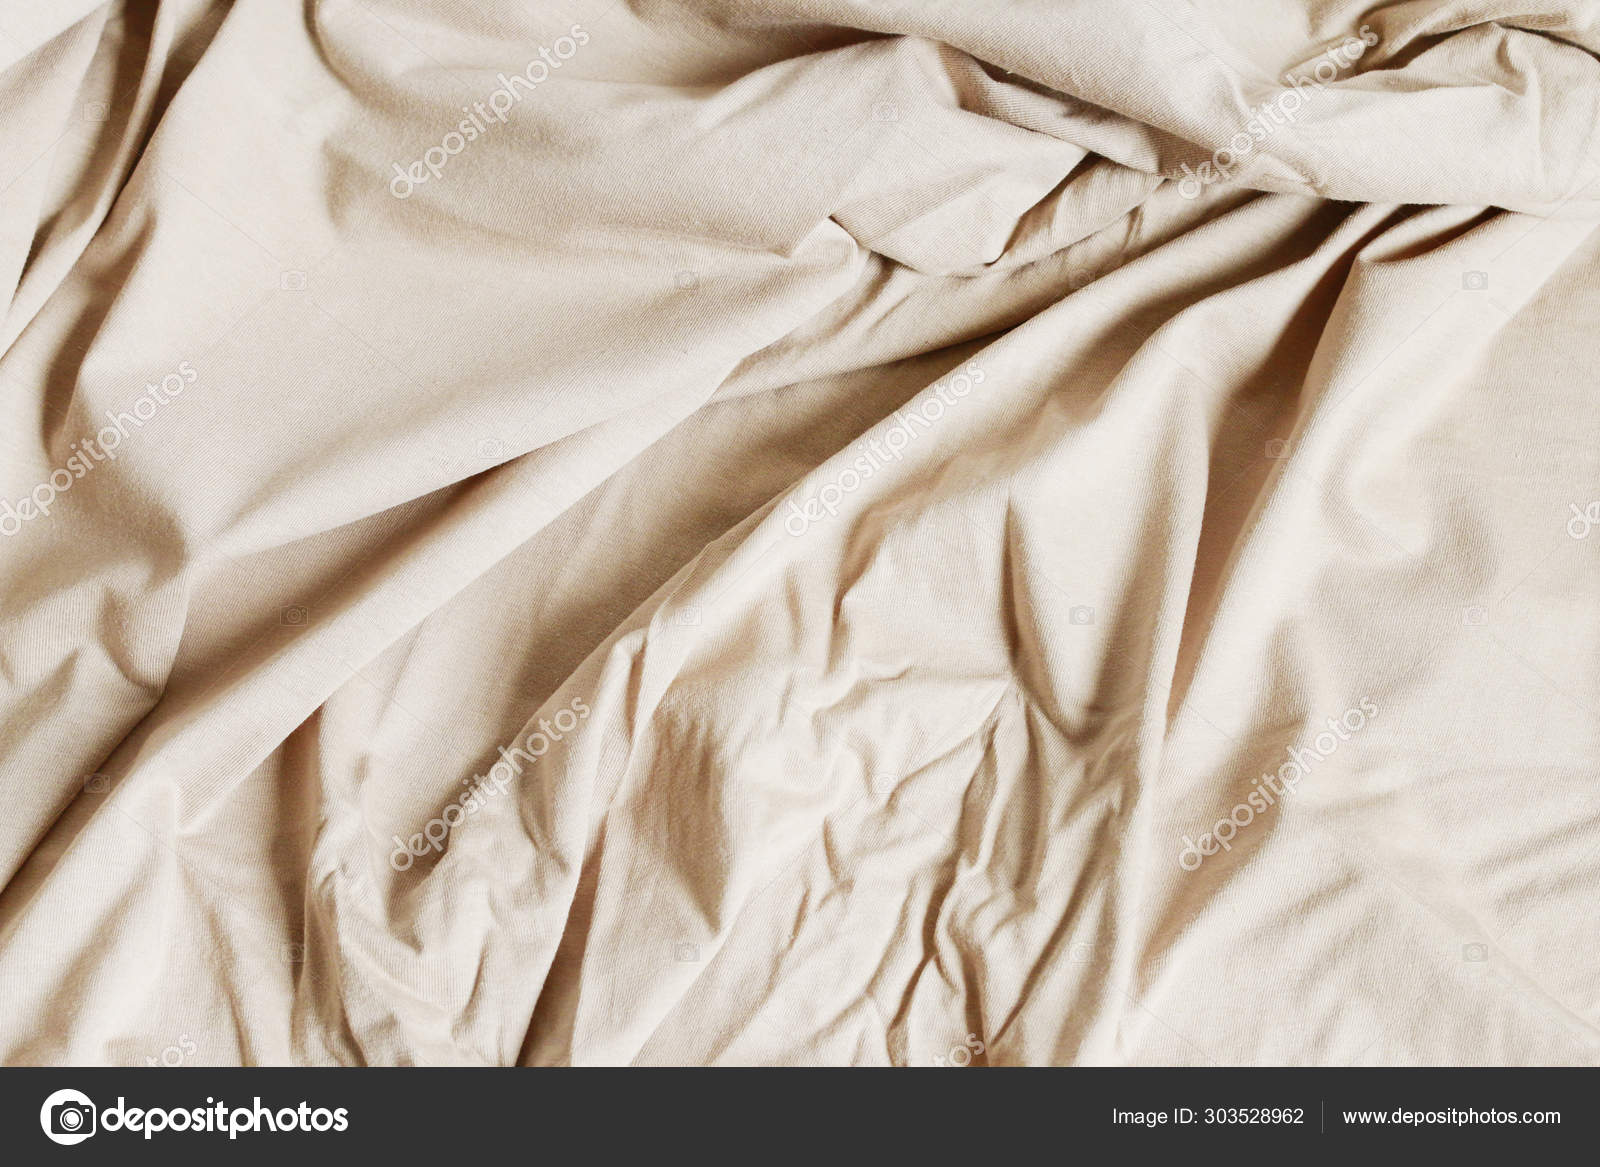 Unfolded Linen on a Bed  Free Stock Photo